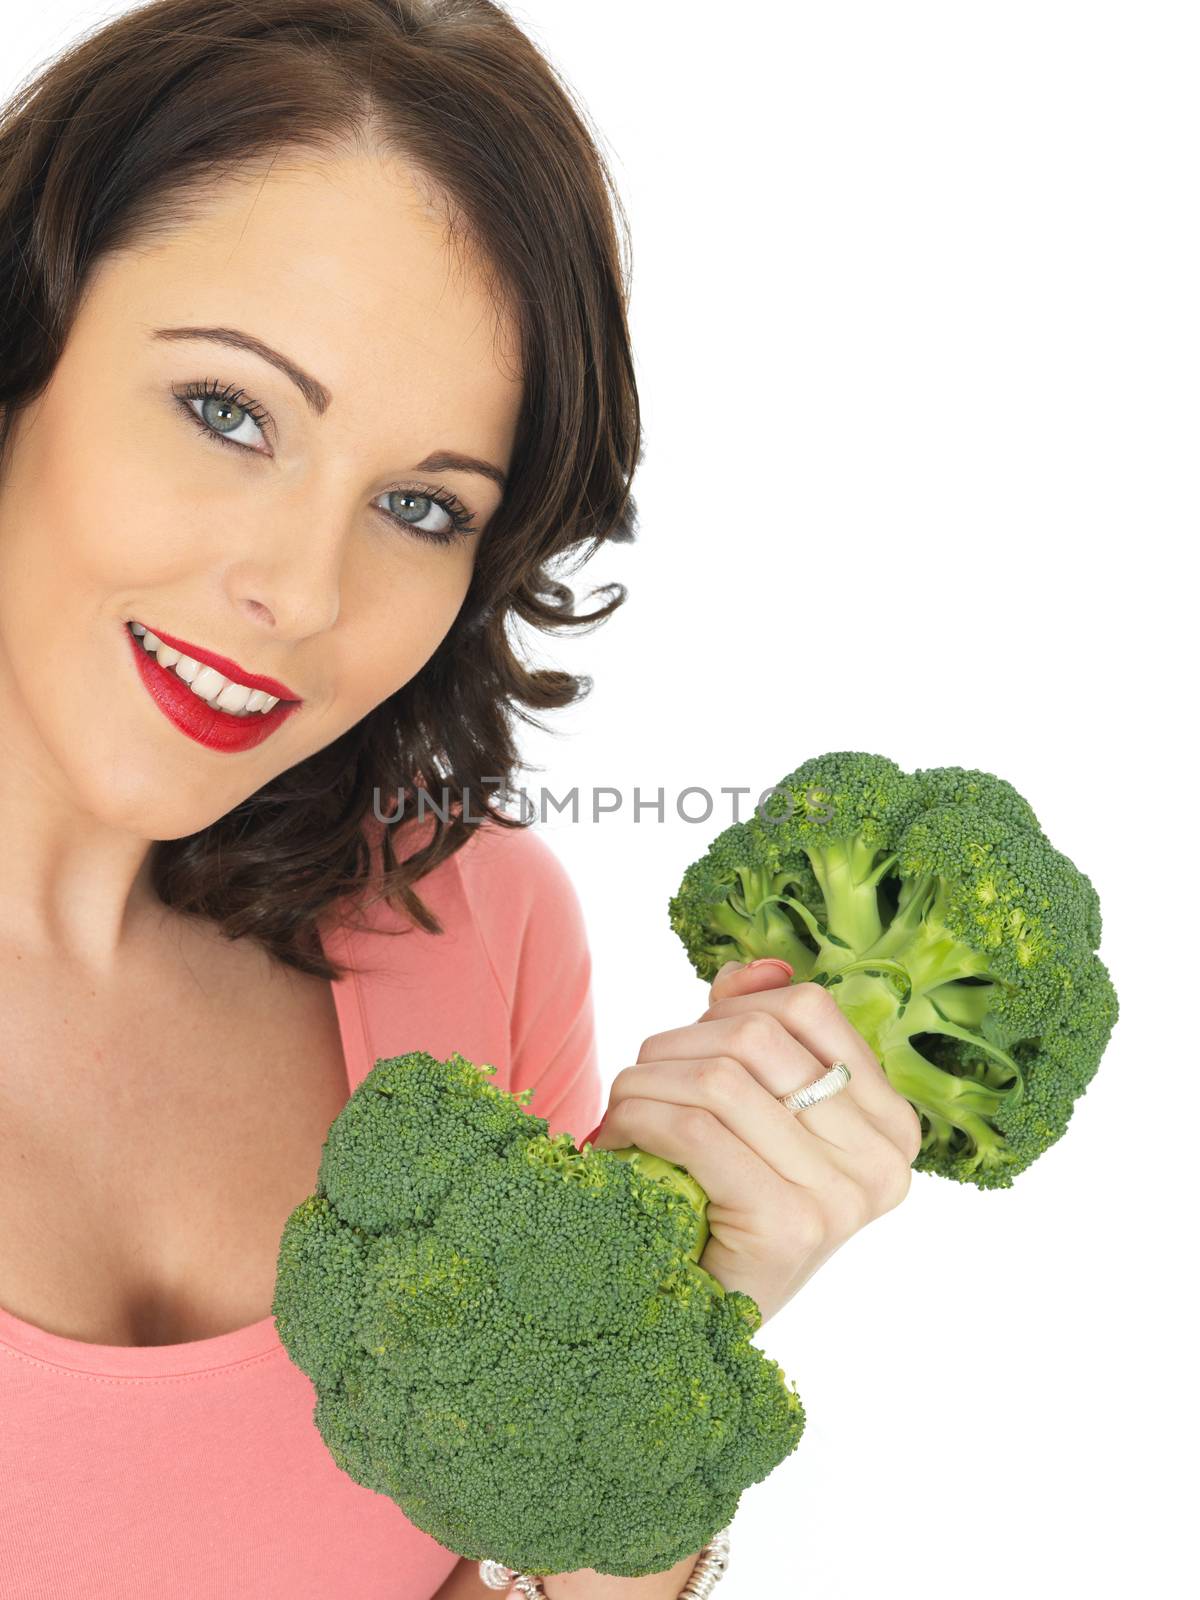 Young Attractive Woman Holding Raw Broccoli